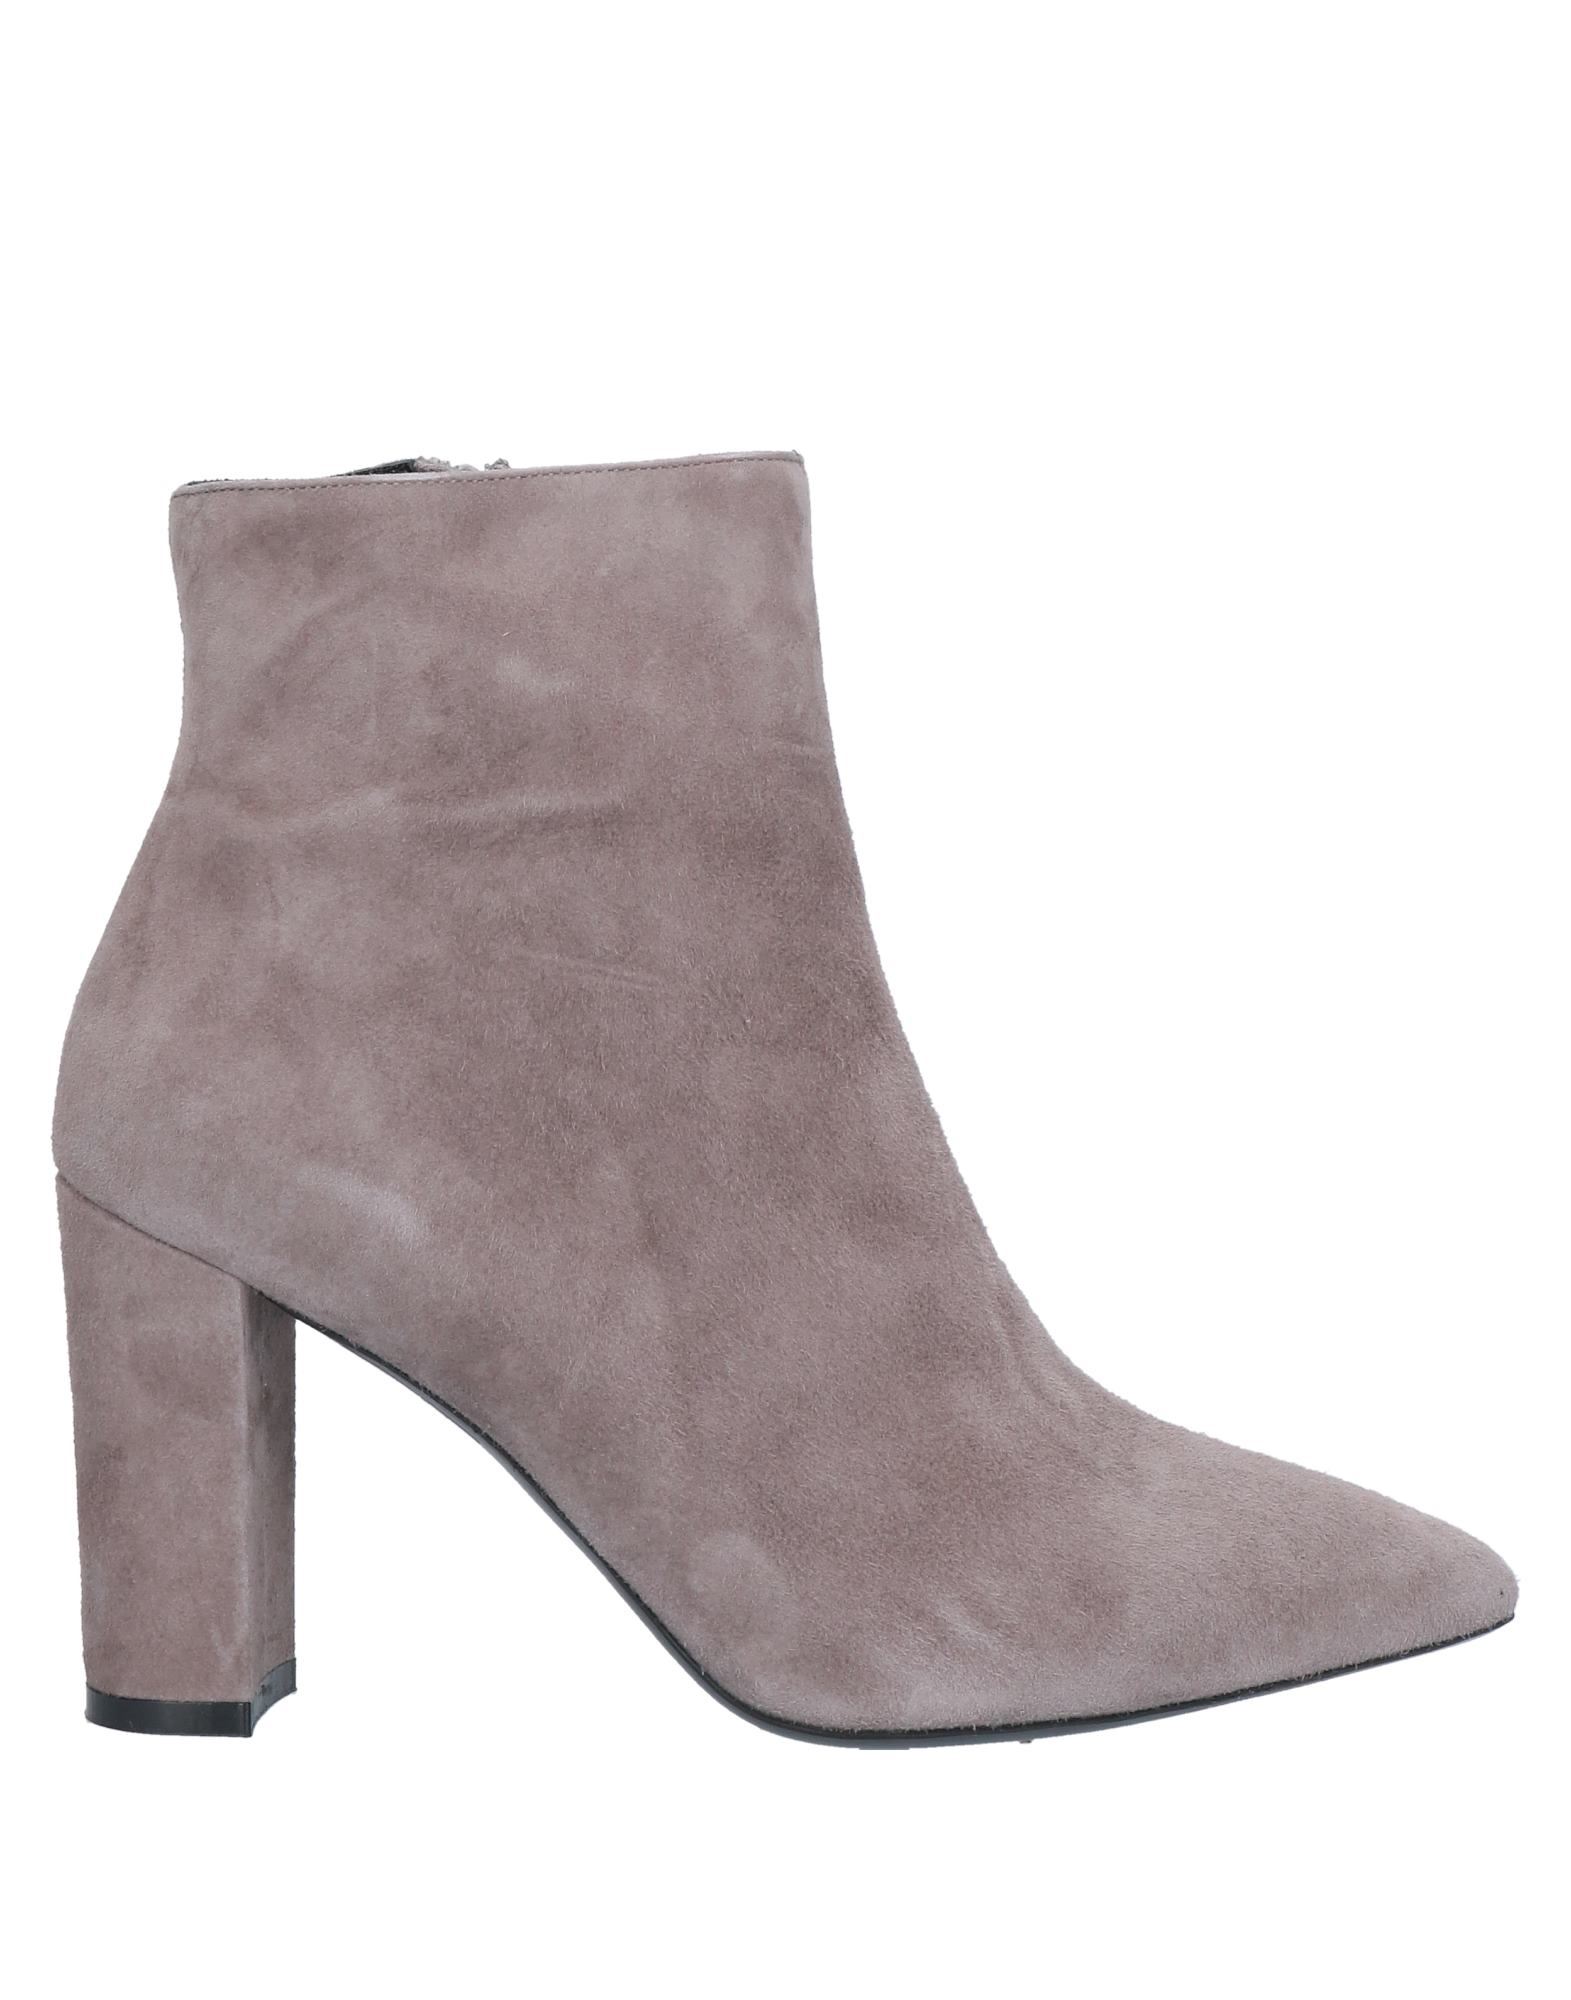 Gianni Marra Ankle Boots In Dove Grey